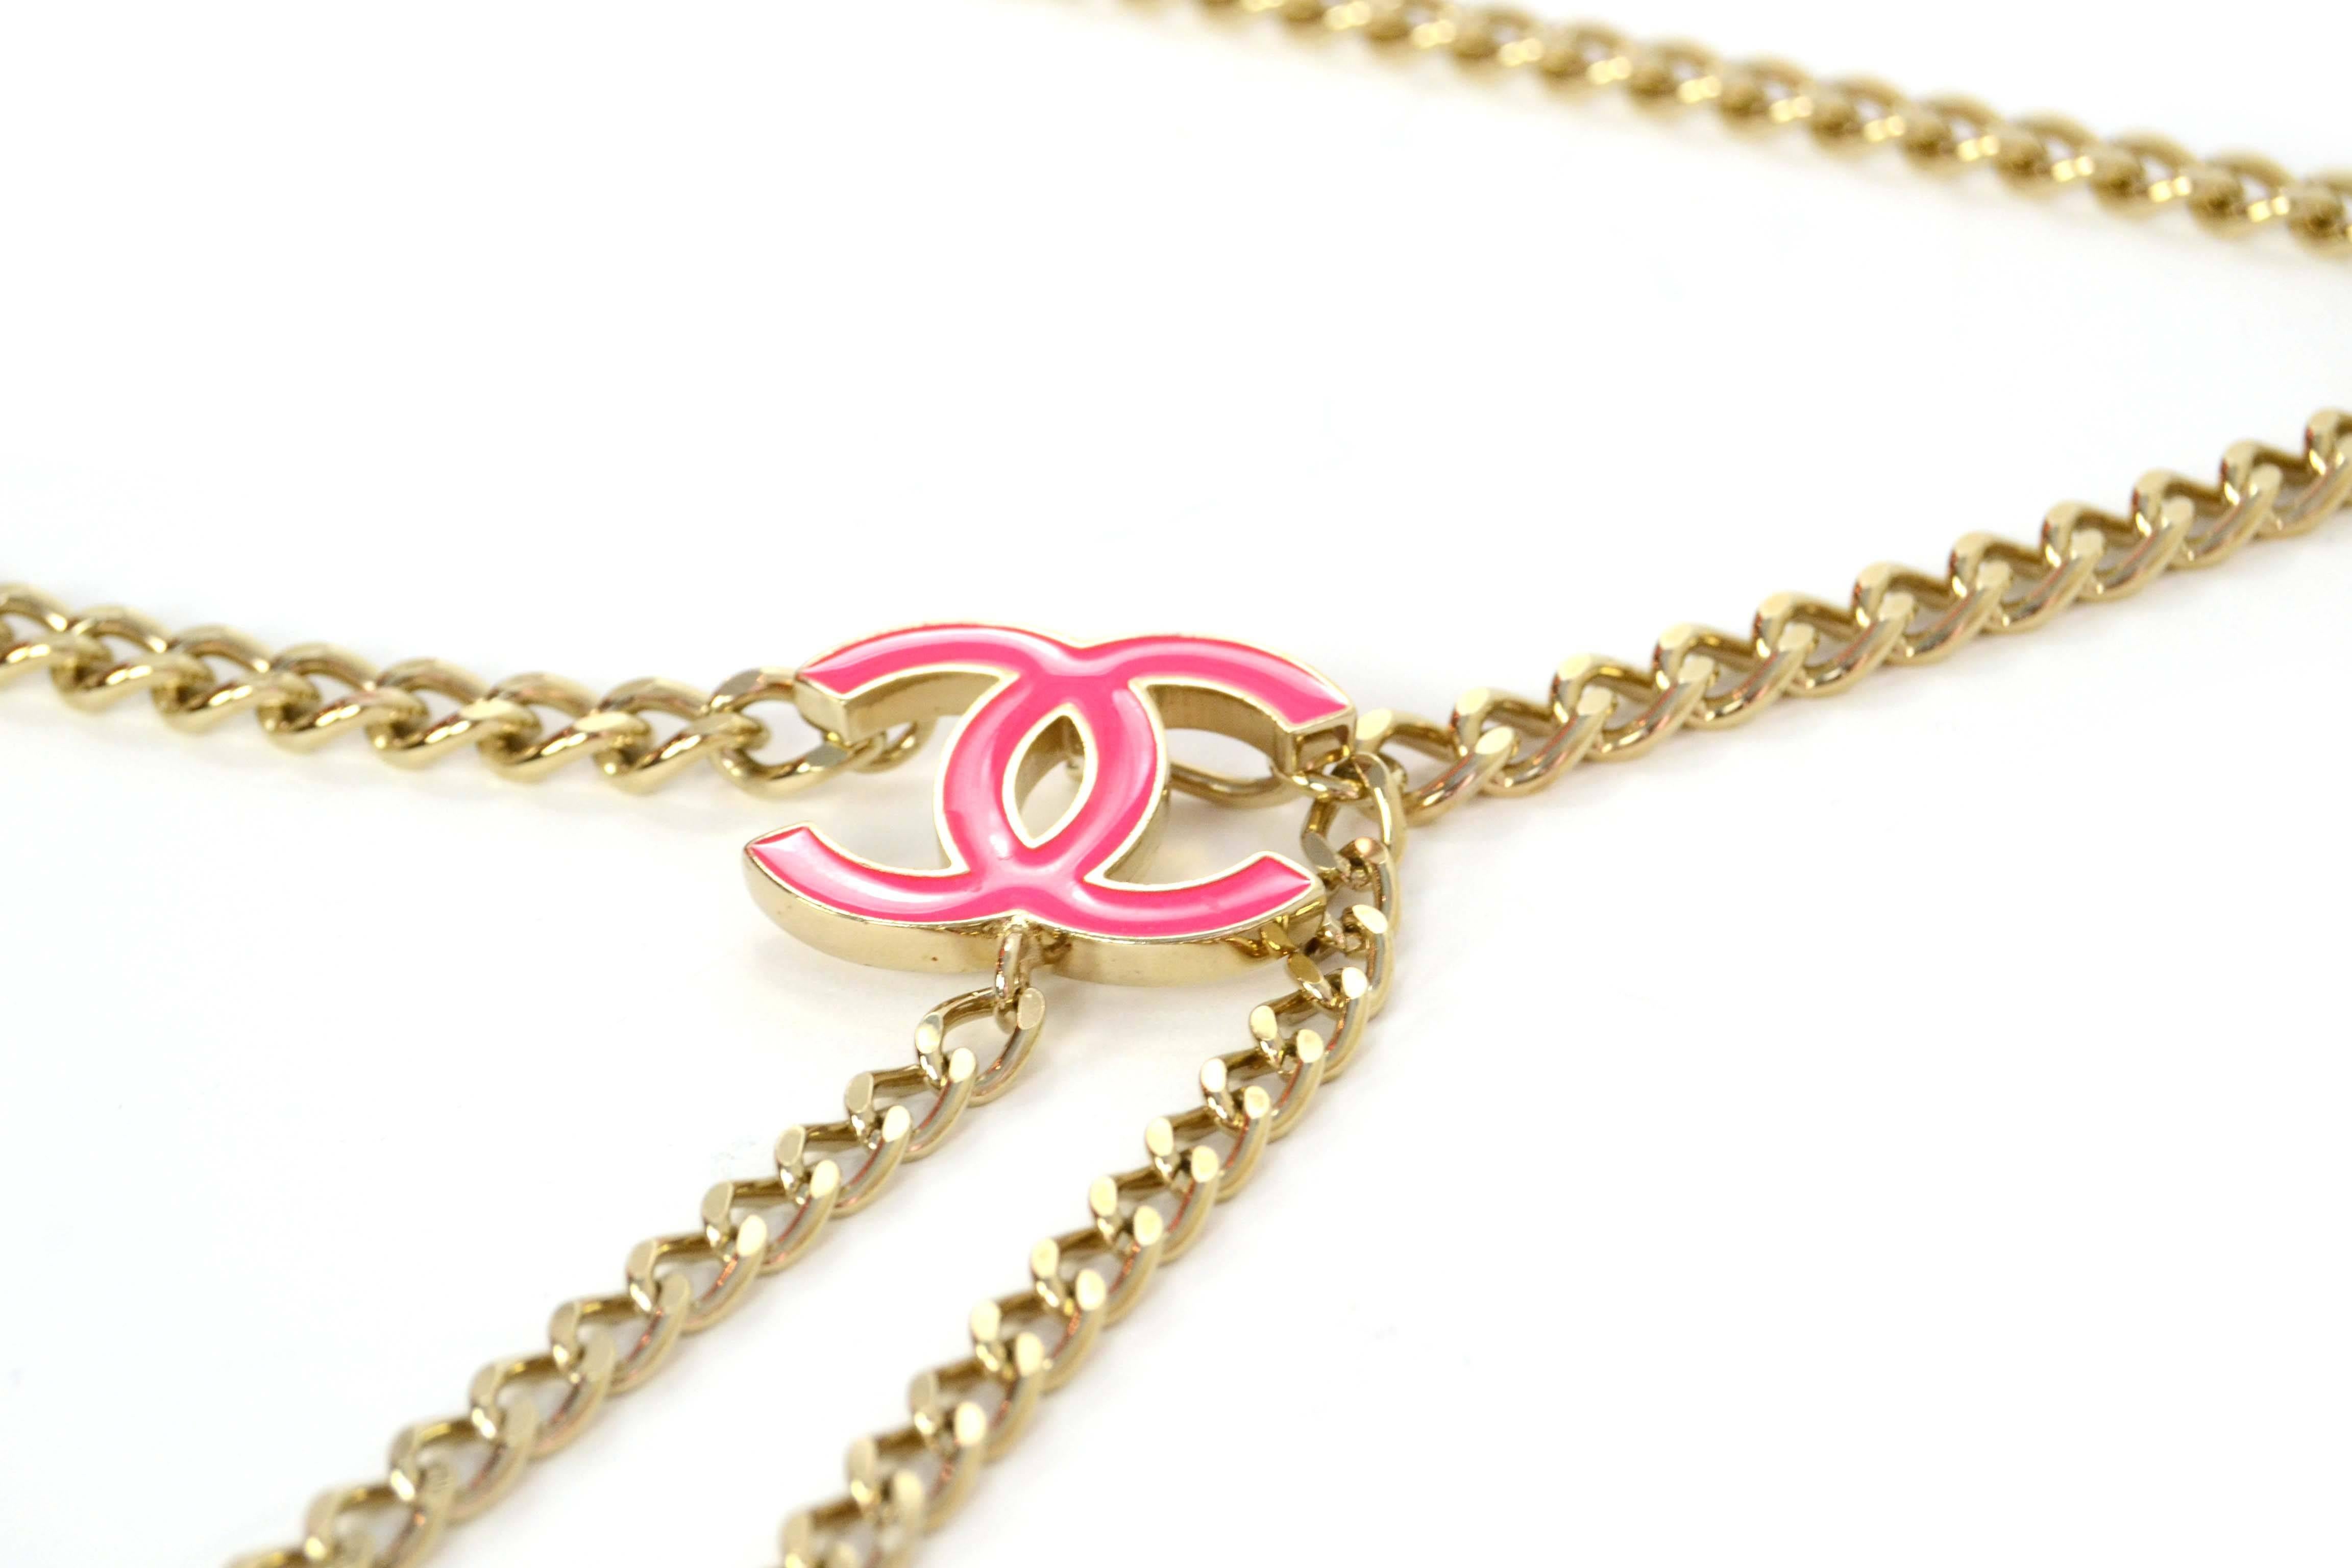 Features light goldtone chain with one large CC and two smal CCs at each end of belt. 

-Made In: Italy
-Year of Production: 2004
-Color: Light goldtone and neon pink
-Materials: Metal and enamel
-Closure: Hook can be placed anywear along